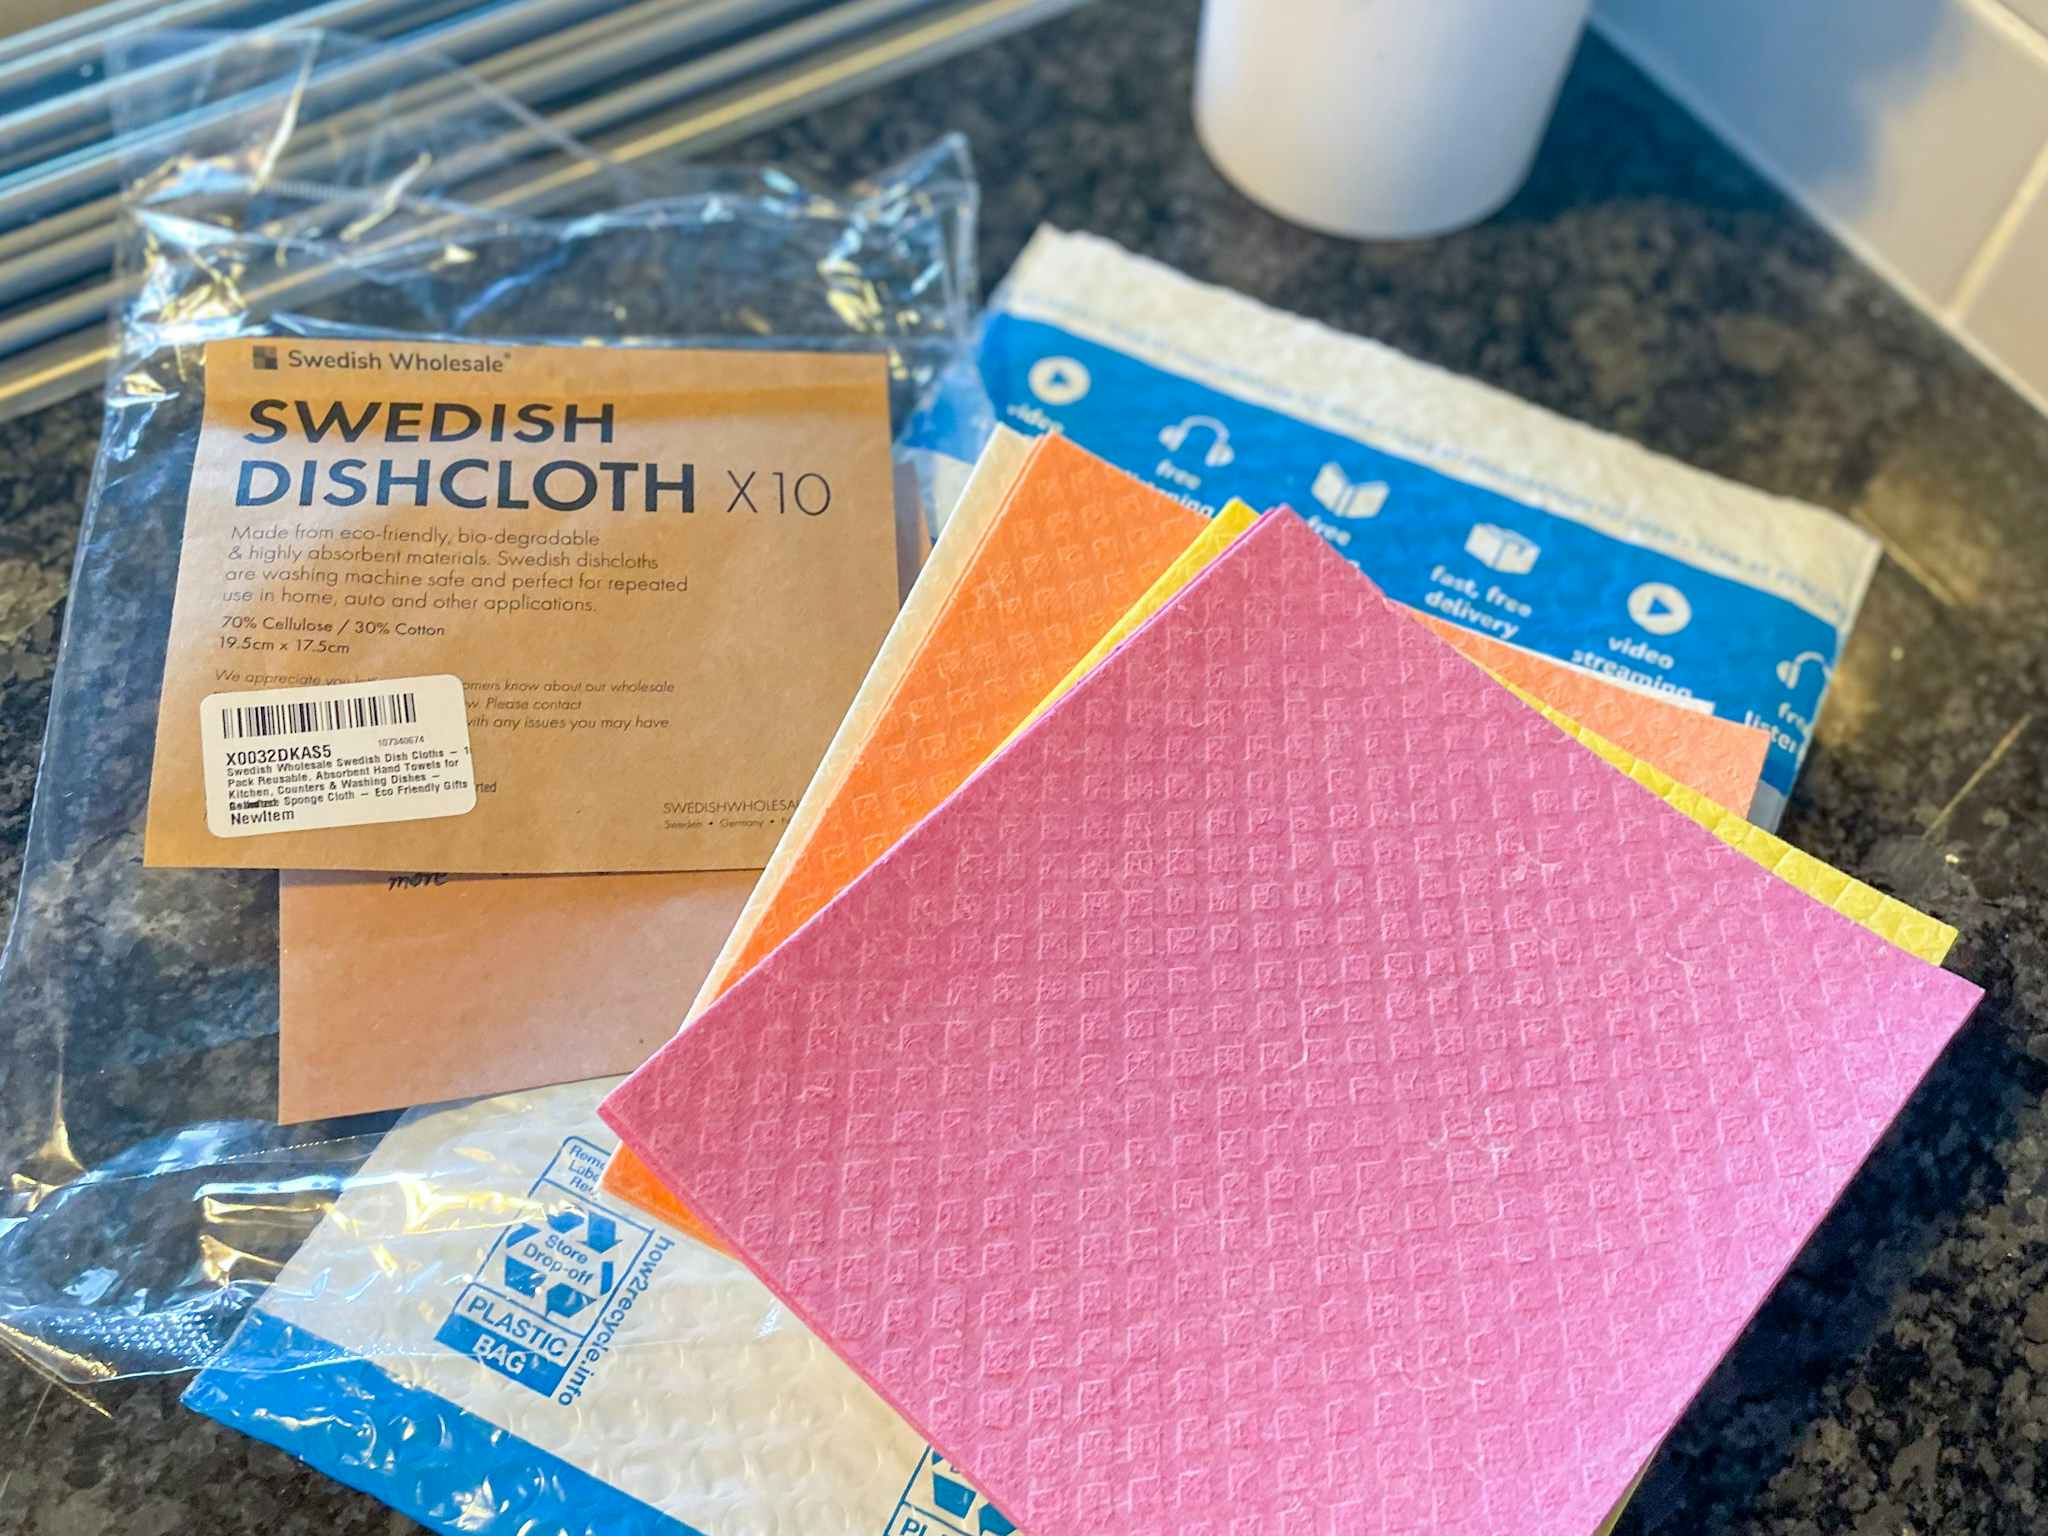 Swedish Dishcloths 10-Pack, Just $5.84 With New Amazon Code